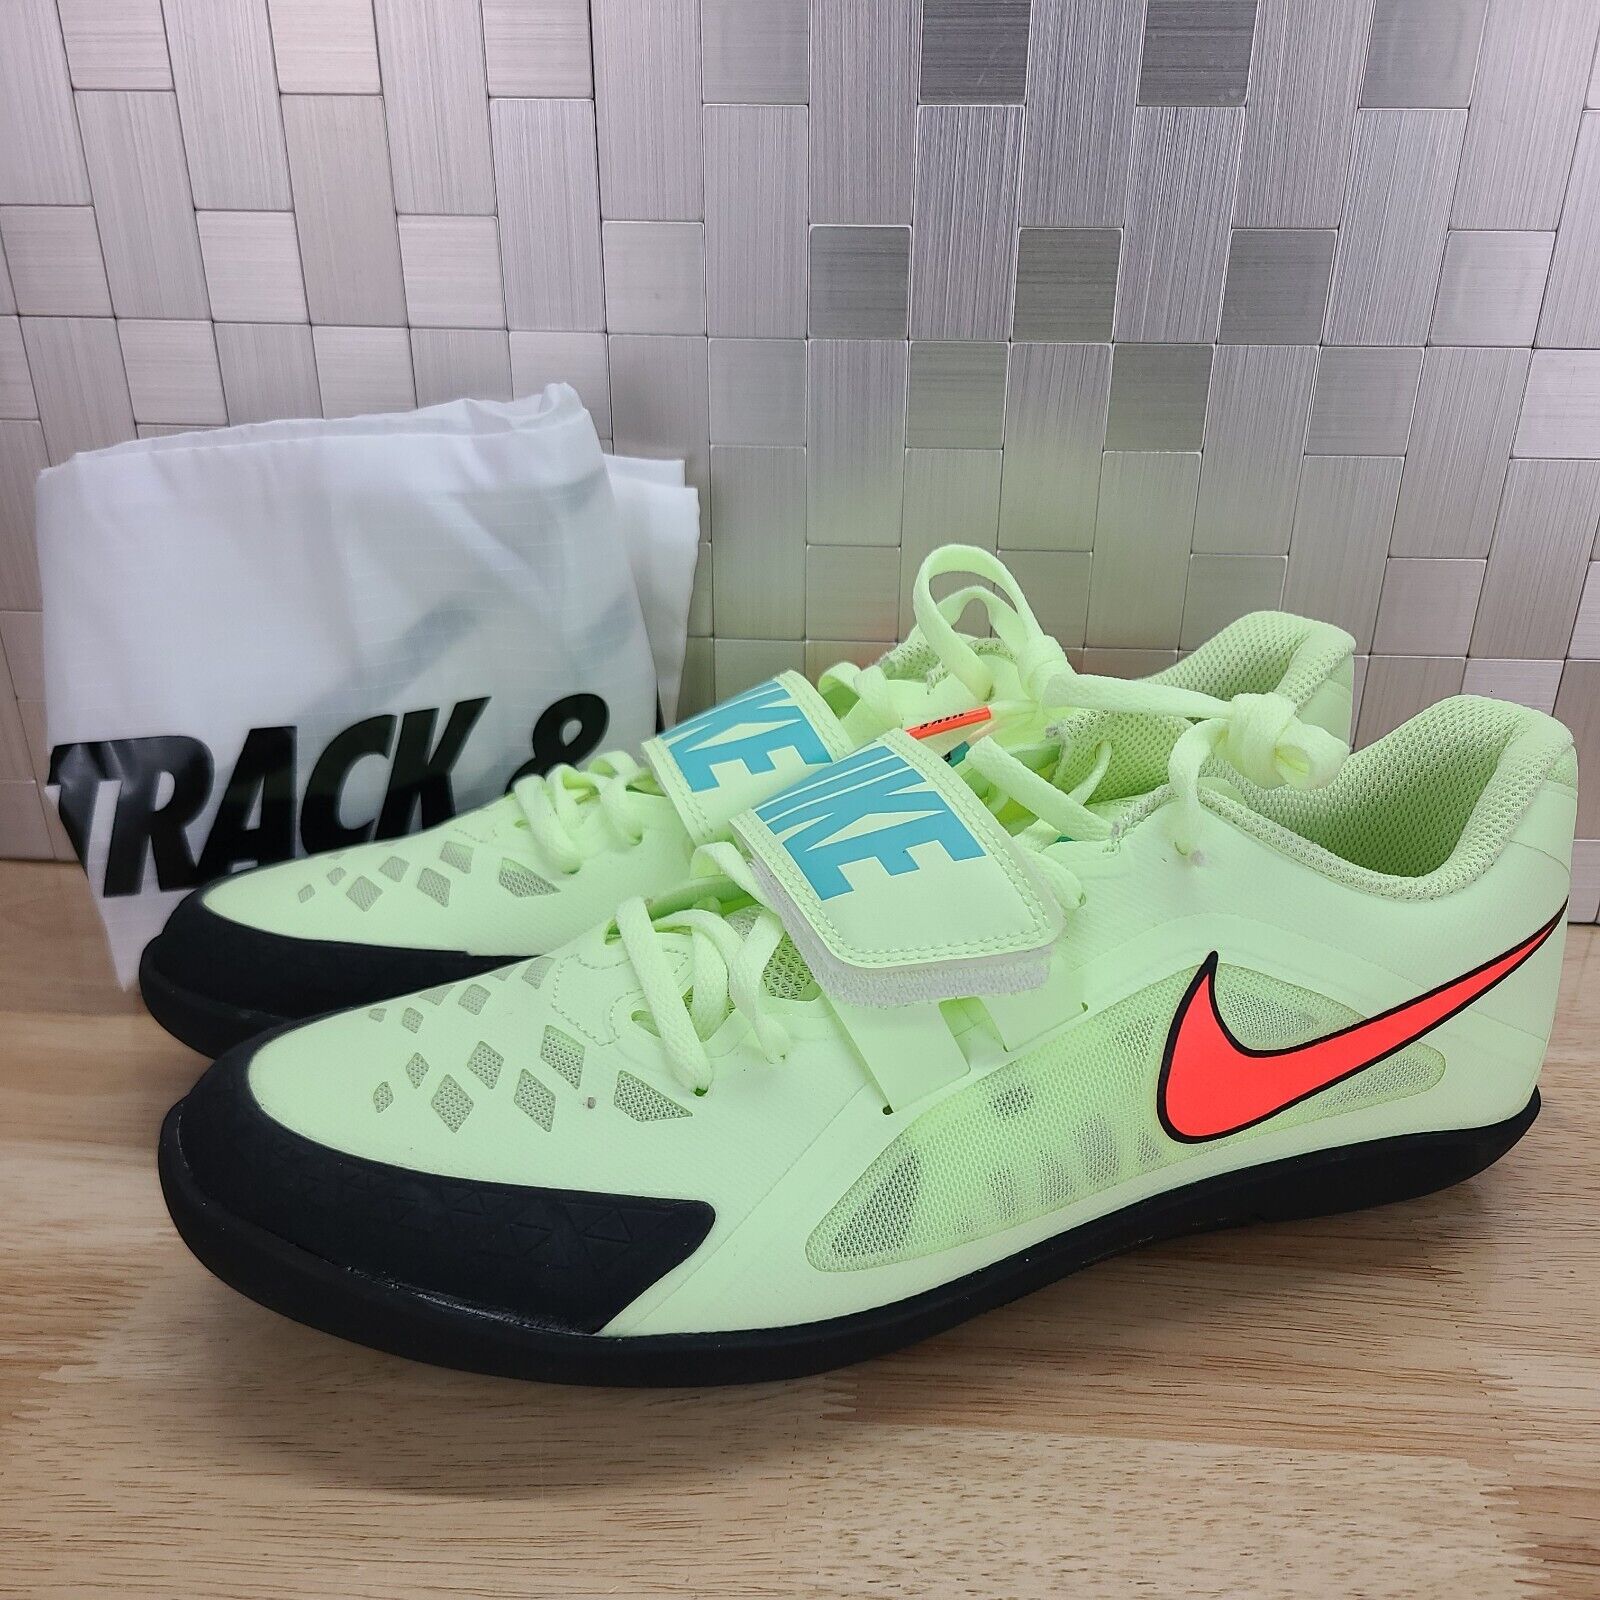 Nike Zoom Rival SD 2 Volt Green Throwing Shoes Mens Size 9.5 685134-700 New